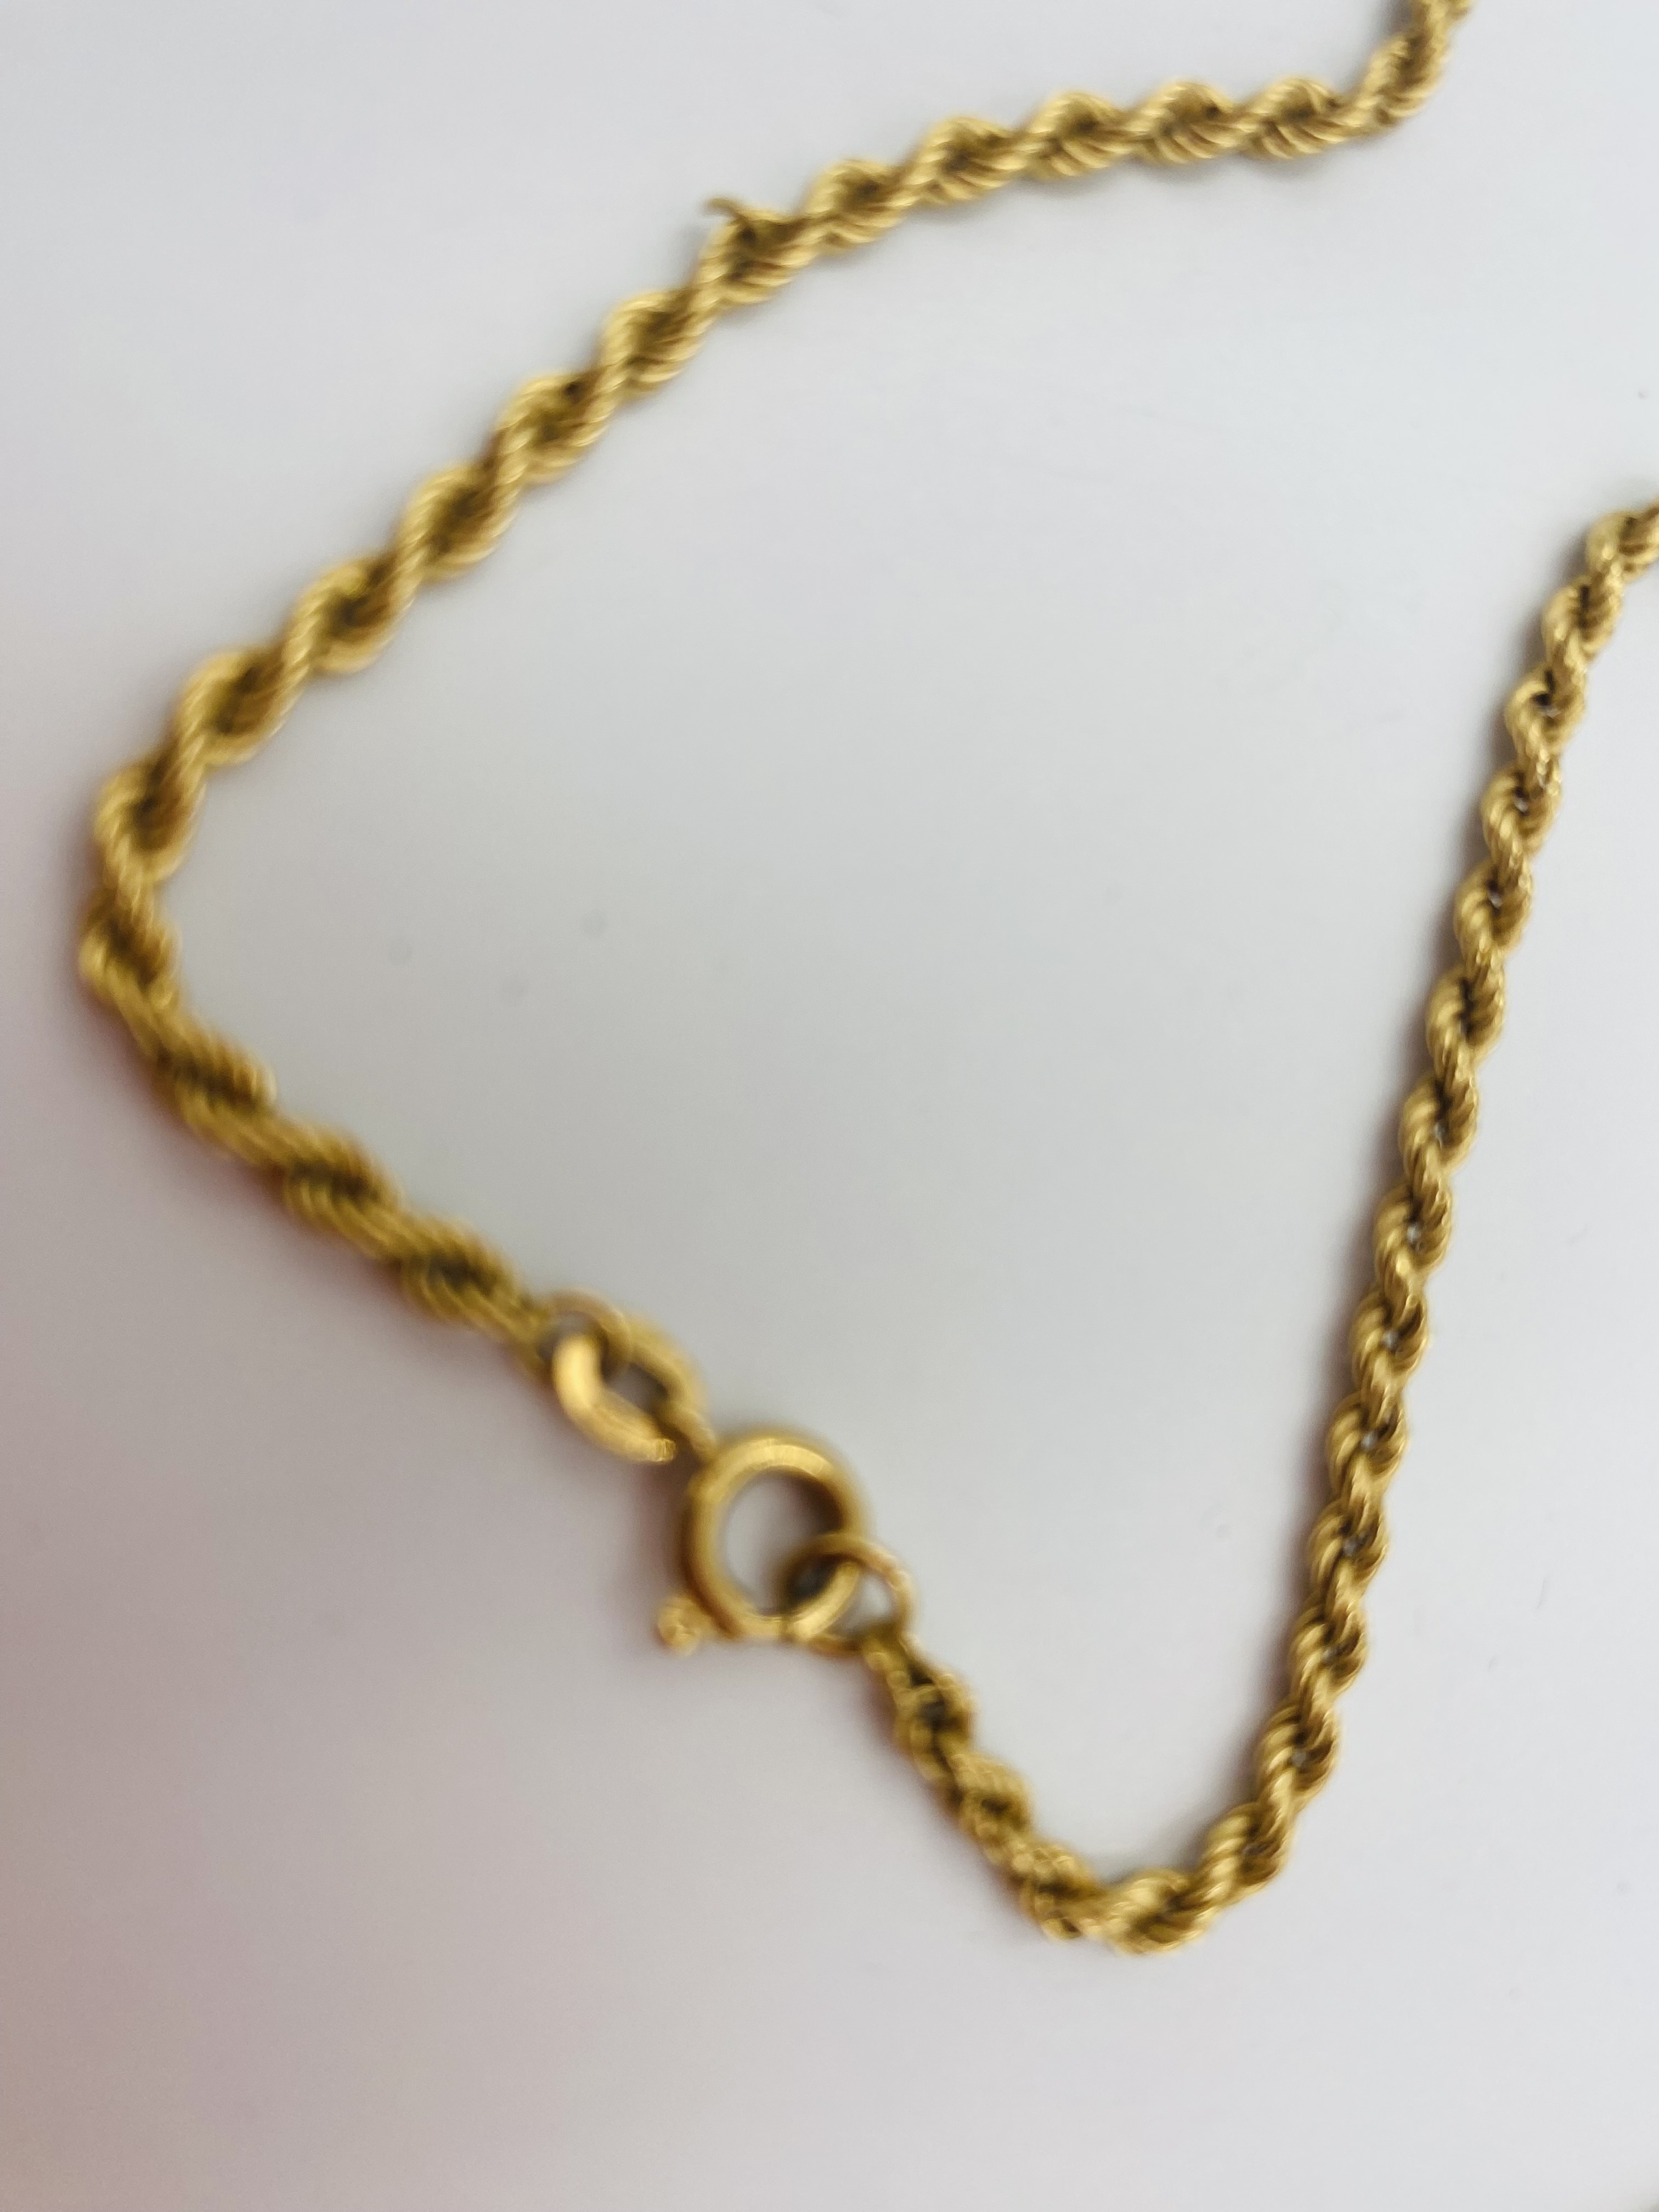 18ct gold necklace - Image 2 of 4